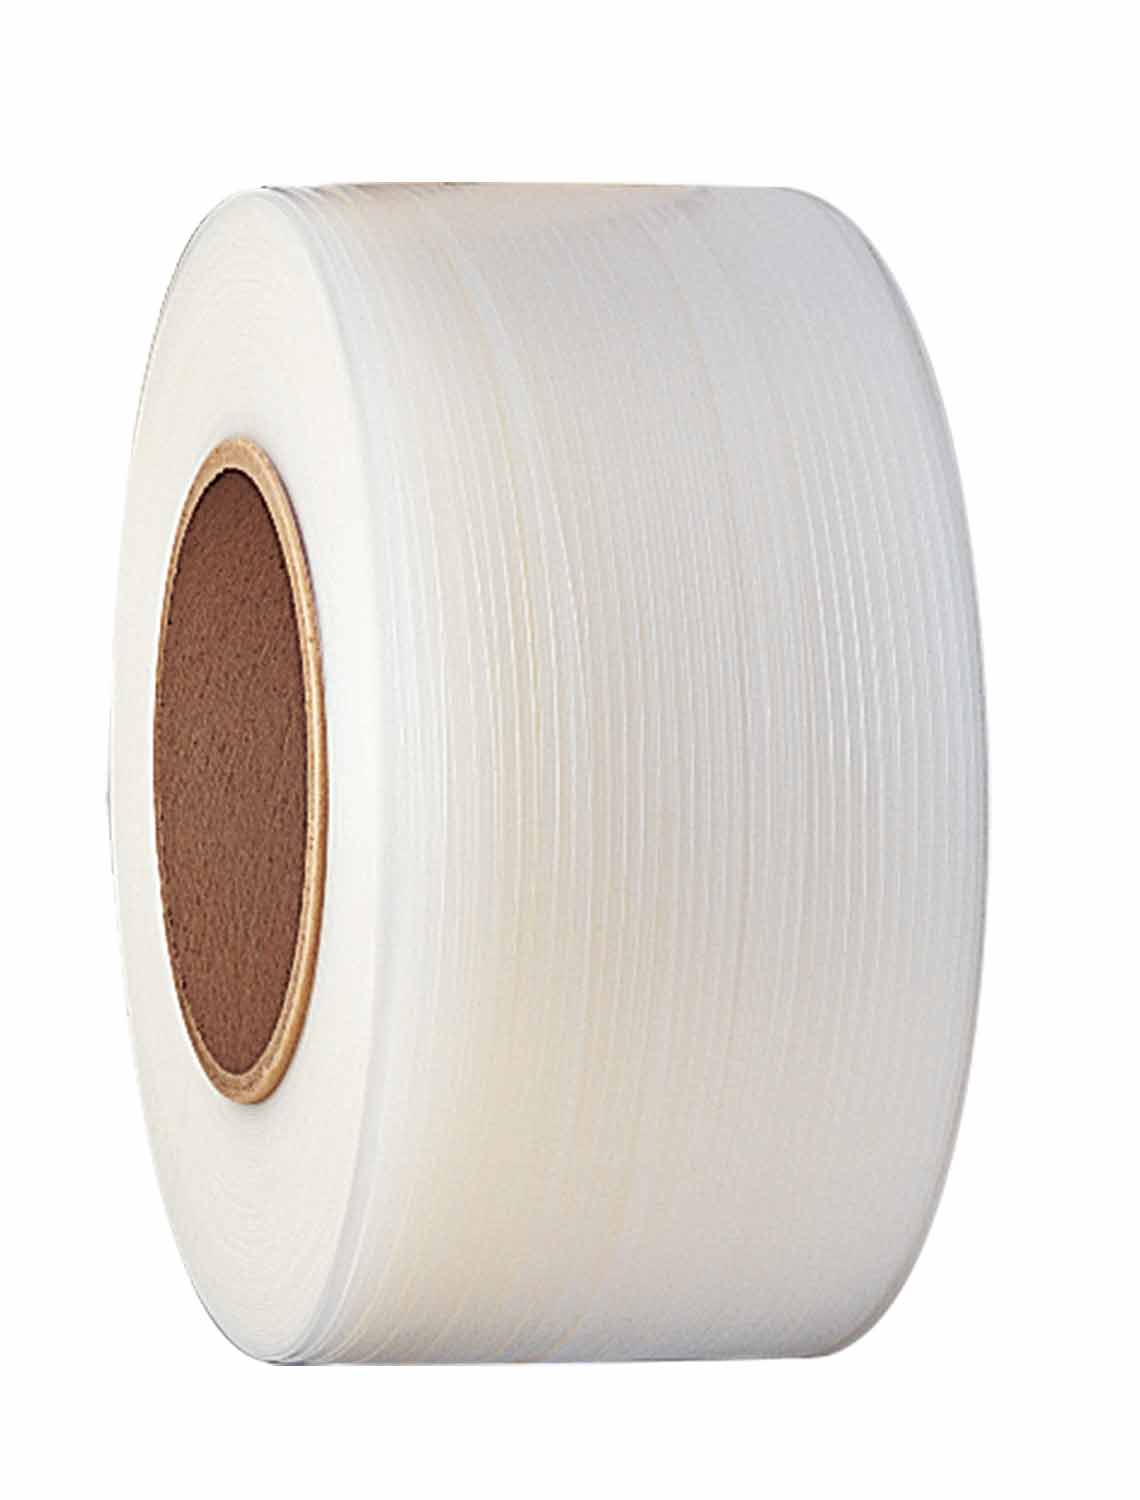 PLASTIC STRAPPING CLEAR 3/8&quot;
225 LB. 8X8 POLYPROPYLENE
16,000FT.PER RL. 24/SKID